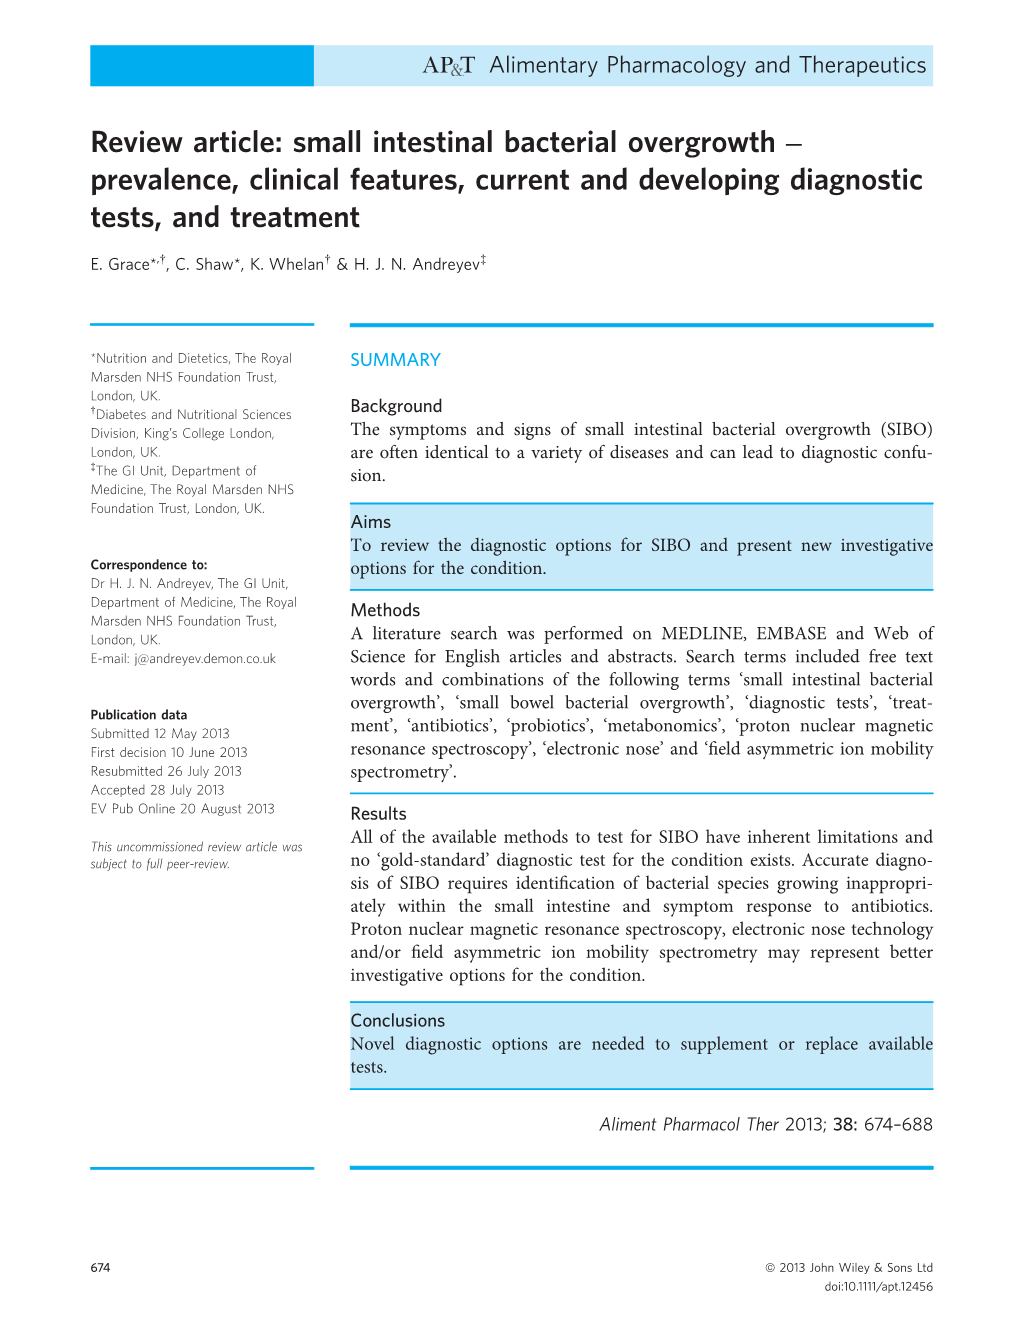 Review Article: Small Intestinal Bacterial Overgrowth Prevalence, Clinical Features, Current and Developing Diagnostic Tests, A